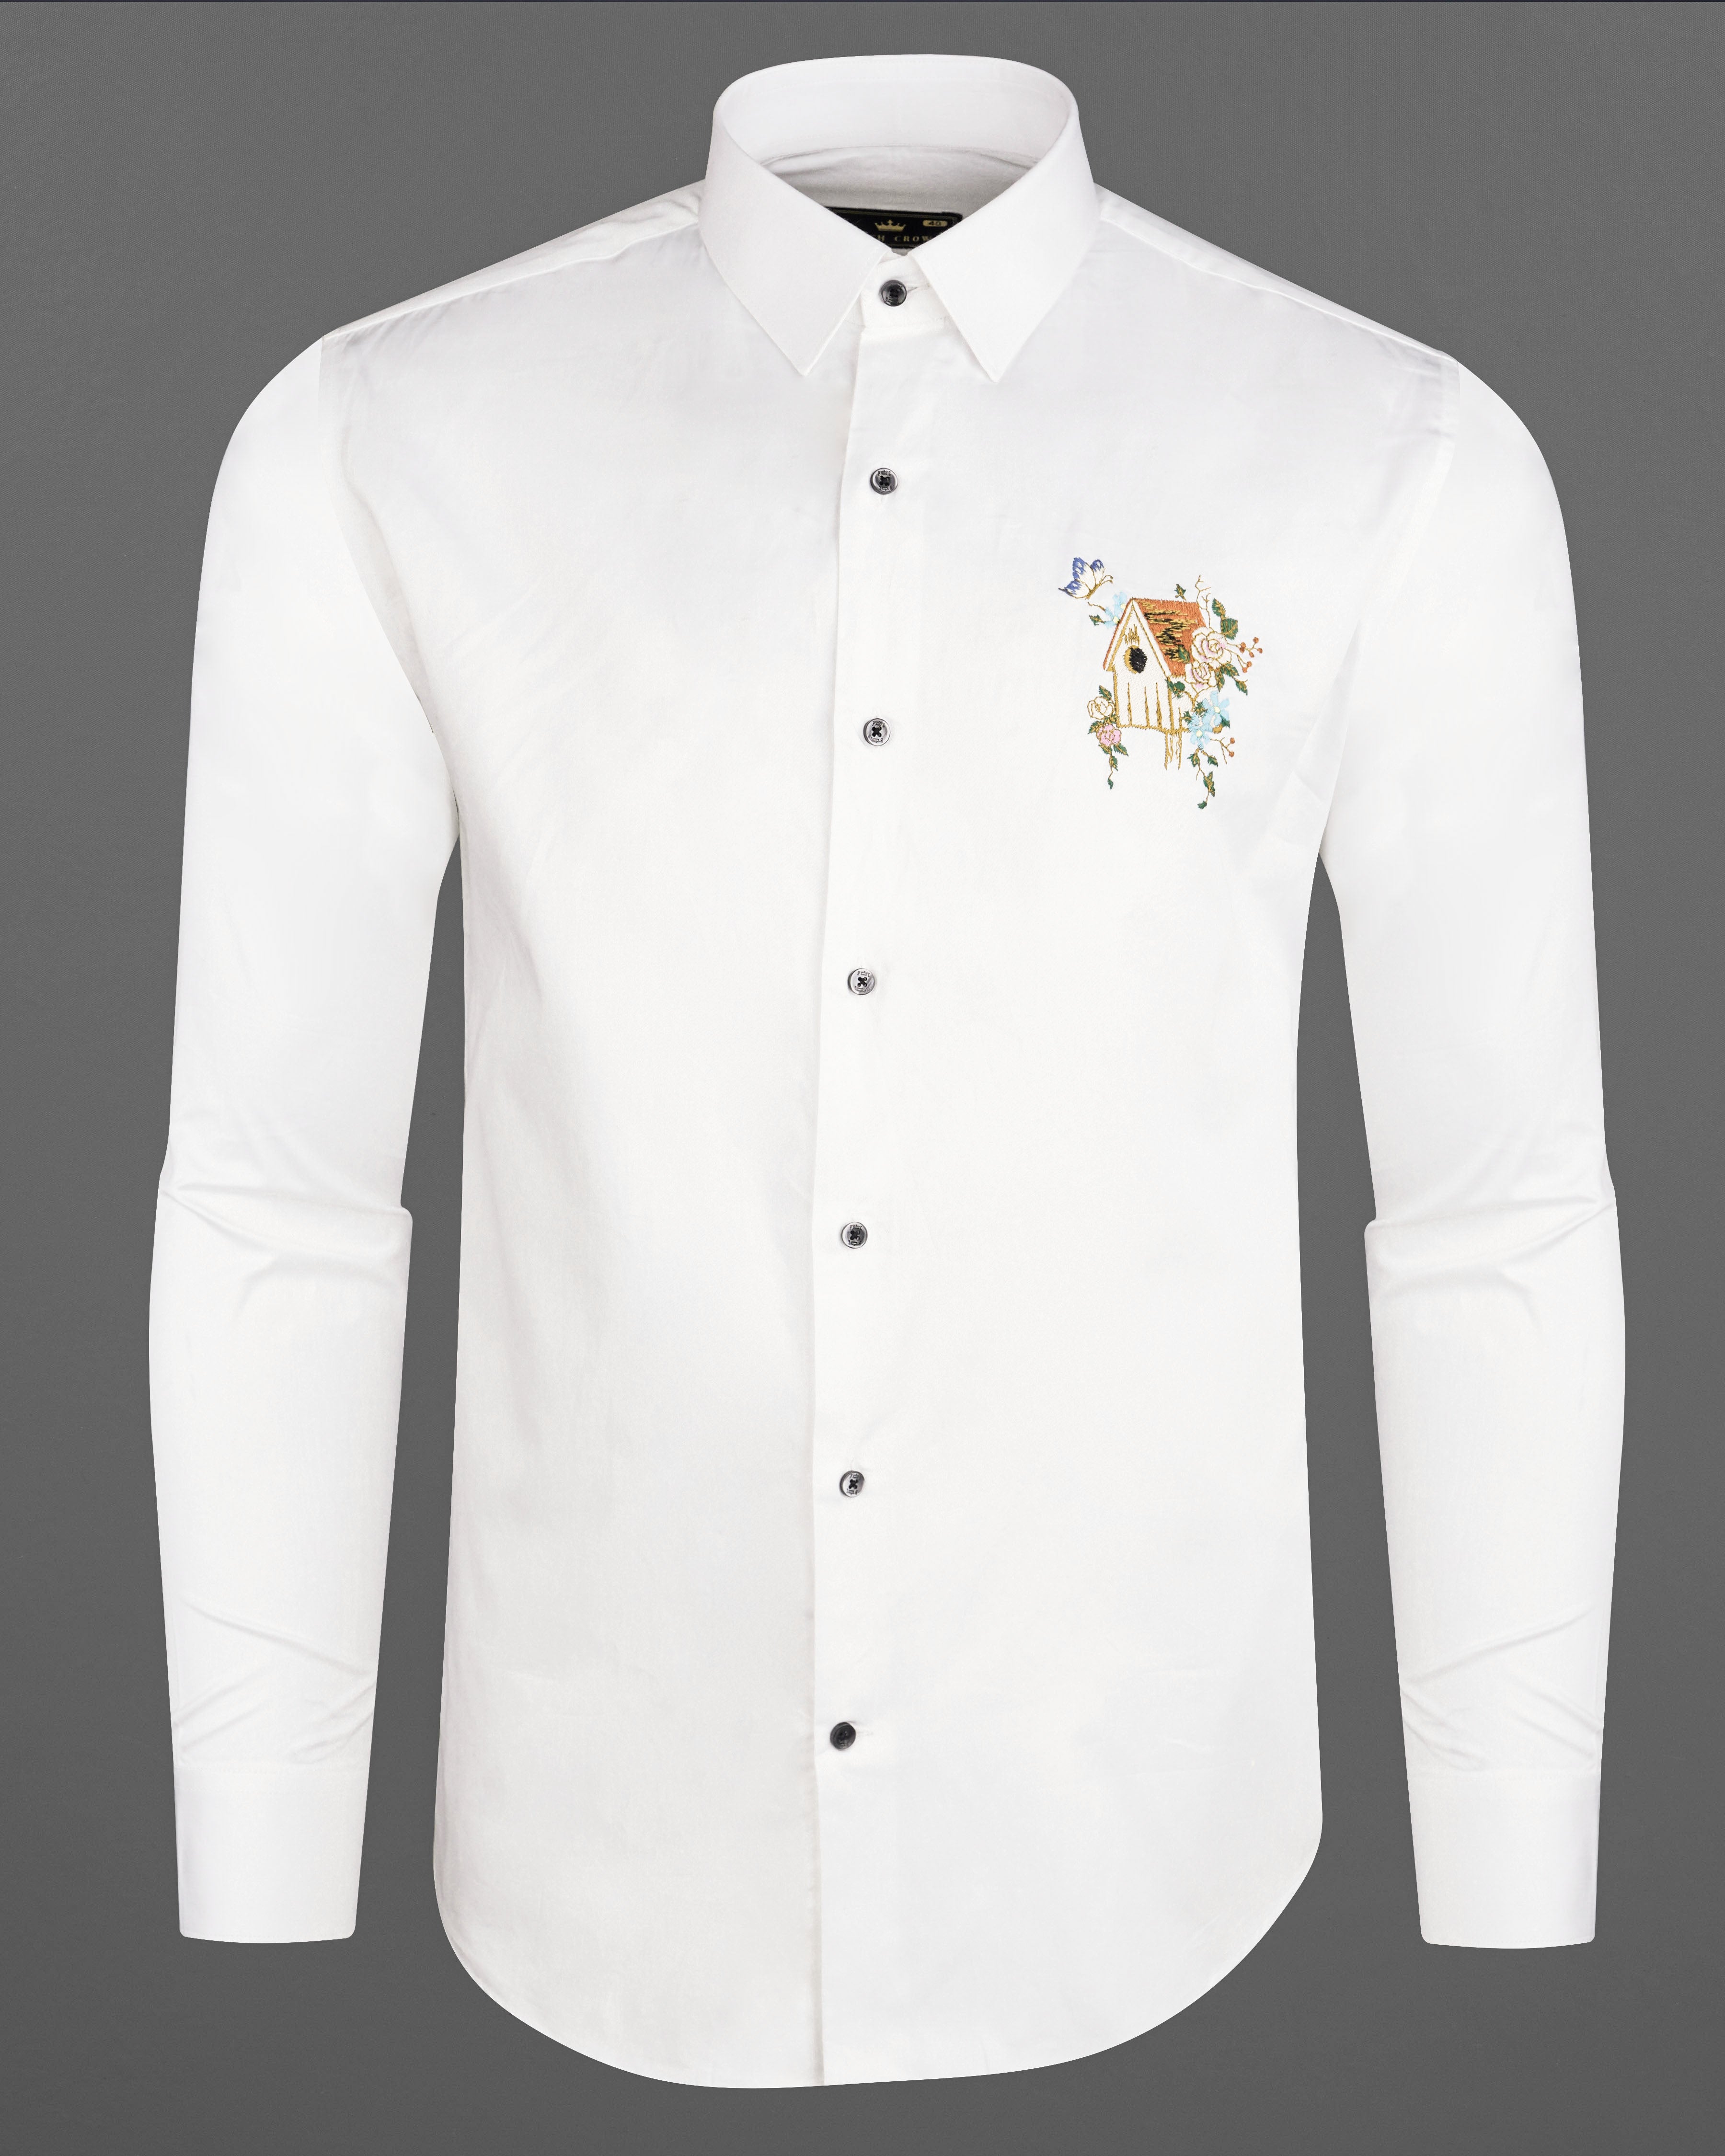 Bright White Subtle Sheen with House and Flower Embroidered Super Soft Premium Cotton Shirt 1062-BLK-P493-38,1062-BLK-P493-H-38,1062-BLK-P493-39,1062-BLK-P493-H-39,1062-BLK-P493-40,1062-BLK-P493-H-40,1062-BLK-P493-42,1062-BLK-P493-H-42,1062-BLK-P493-44,1062-BLK-P493-H-44,1062-BLK-P493-46,1062-BLK-P493-H-46,1062-BLK-P493-48,1062-BLK-P493-H-48,1062-BLK-P493-50,1062-BLK-P493-H-50,1062-BLK-P493-52,1062-BLK-P493-H-52